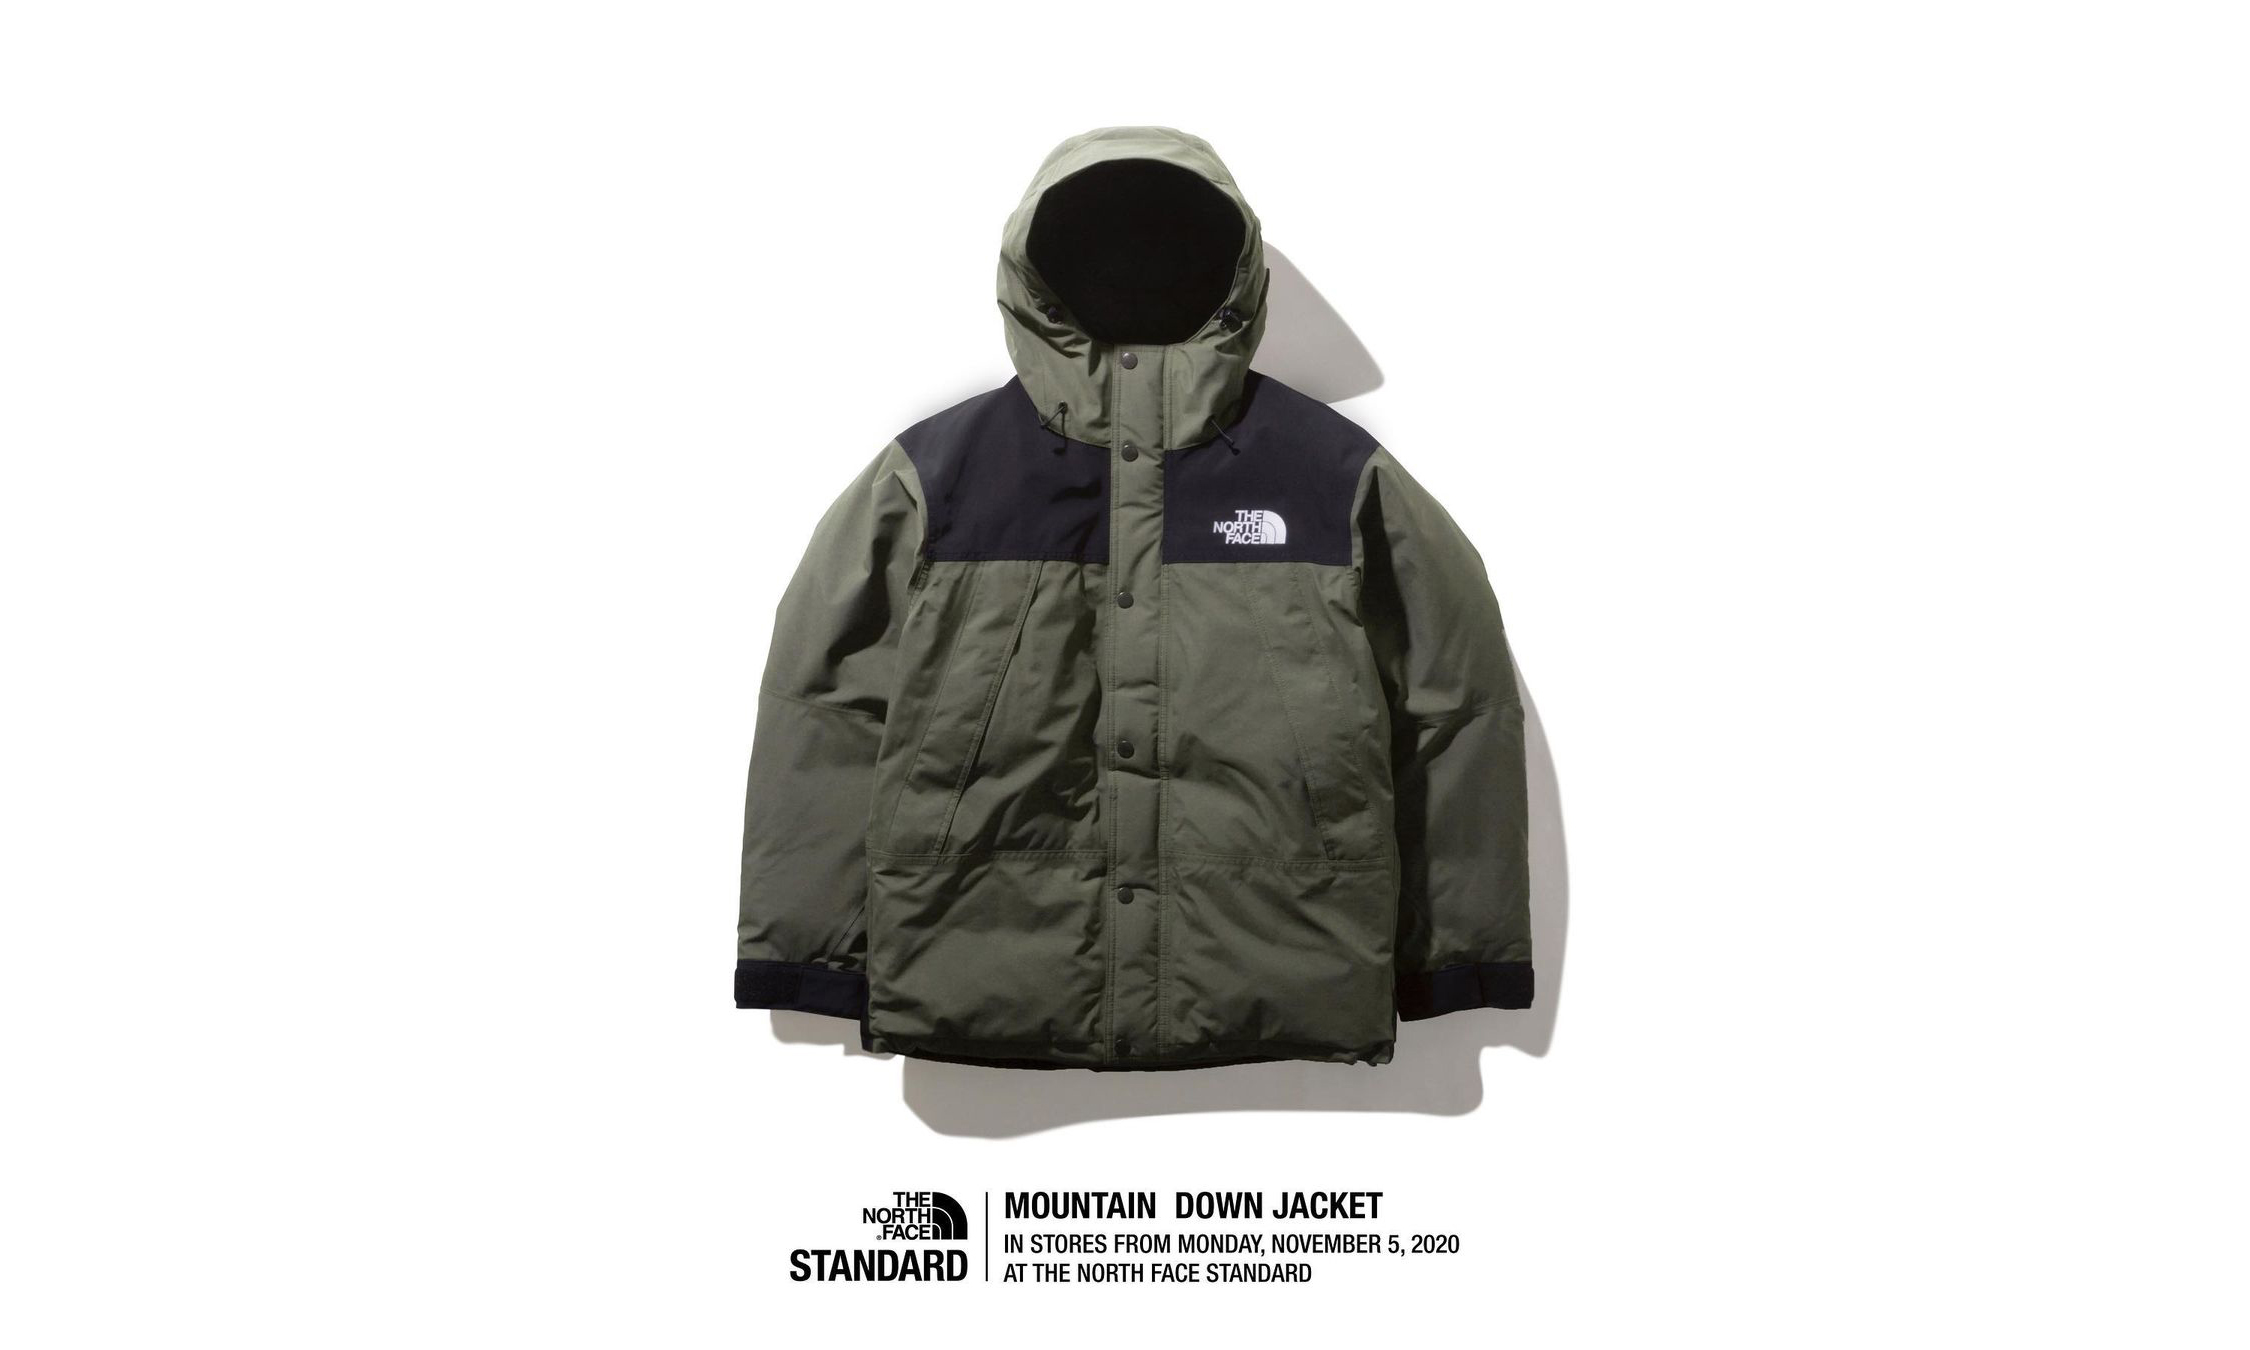 THE NORTH FACE Mountain Down Jacket 再次开售